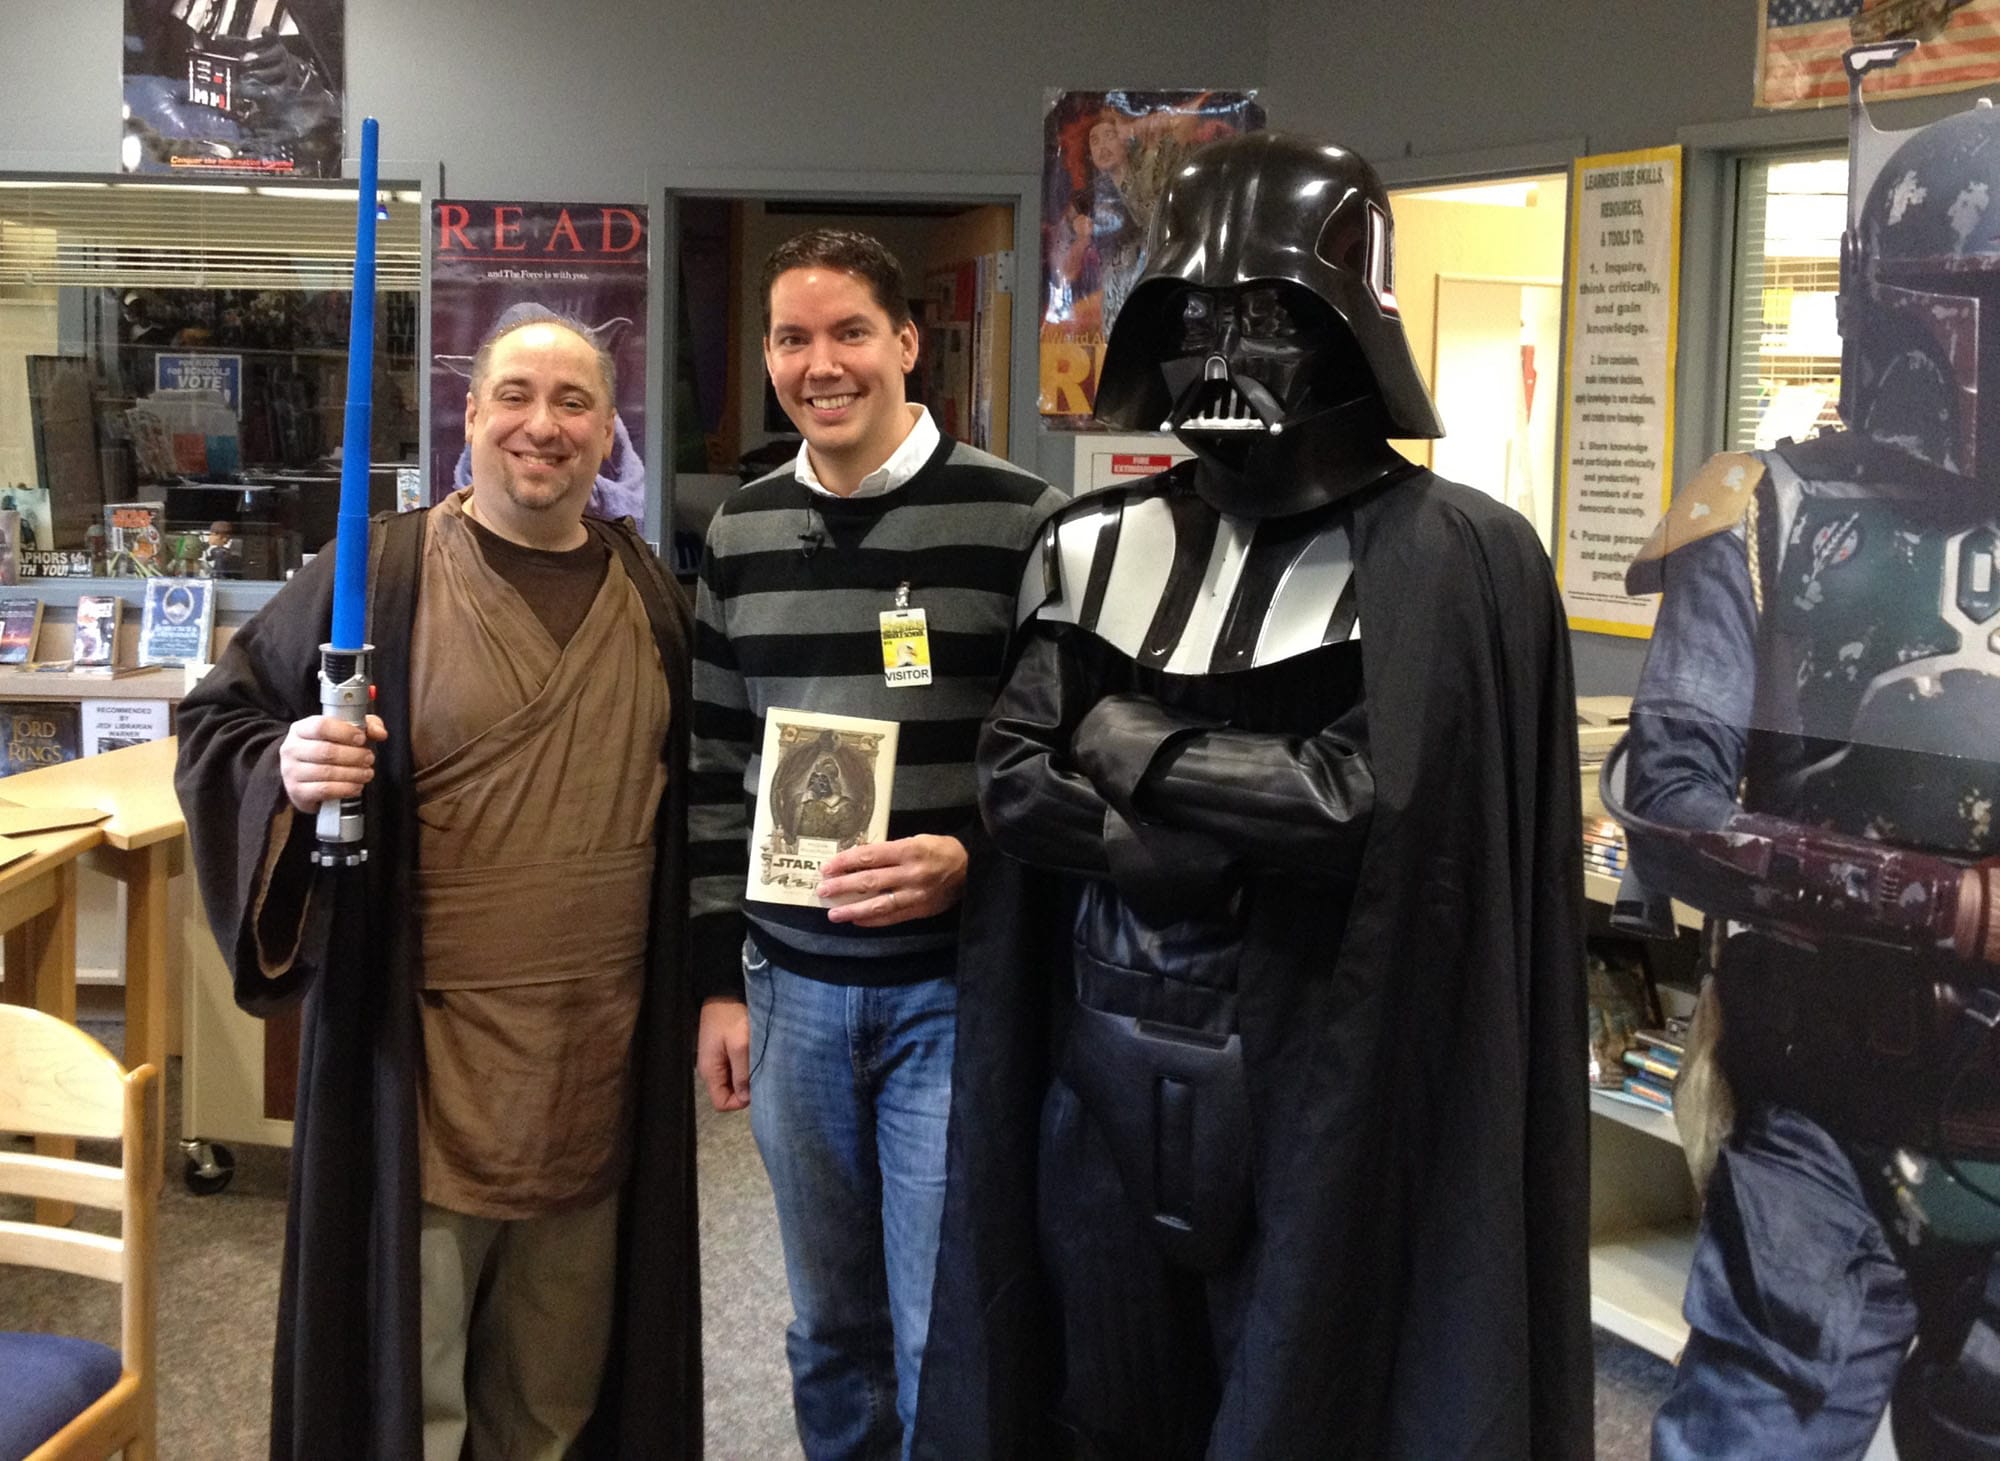 Shahala Middle School: Visiting author and Shakespeare wannabe Ian Doescher, center, with Jedi Master (and teacher-librarian) Paul Warner, left.